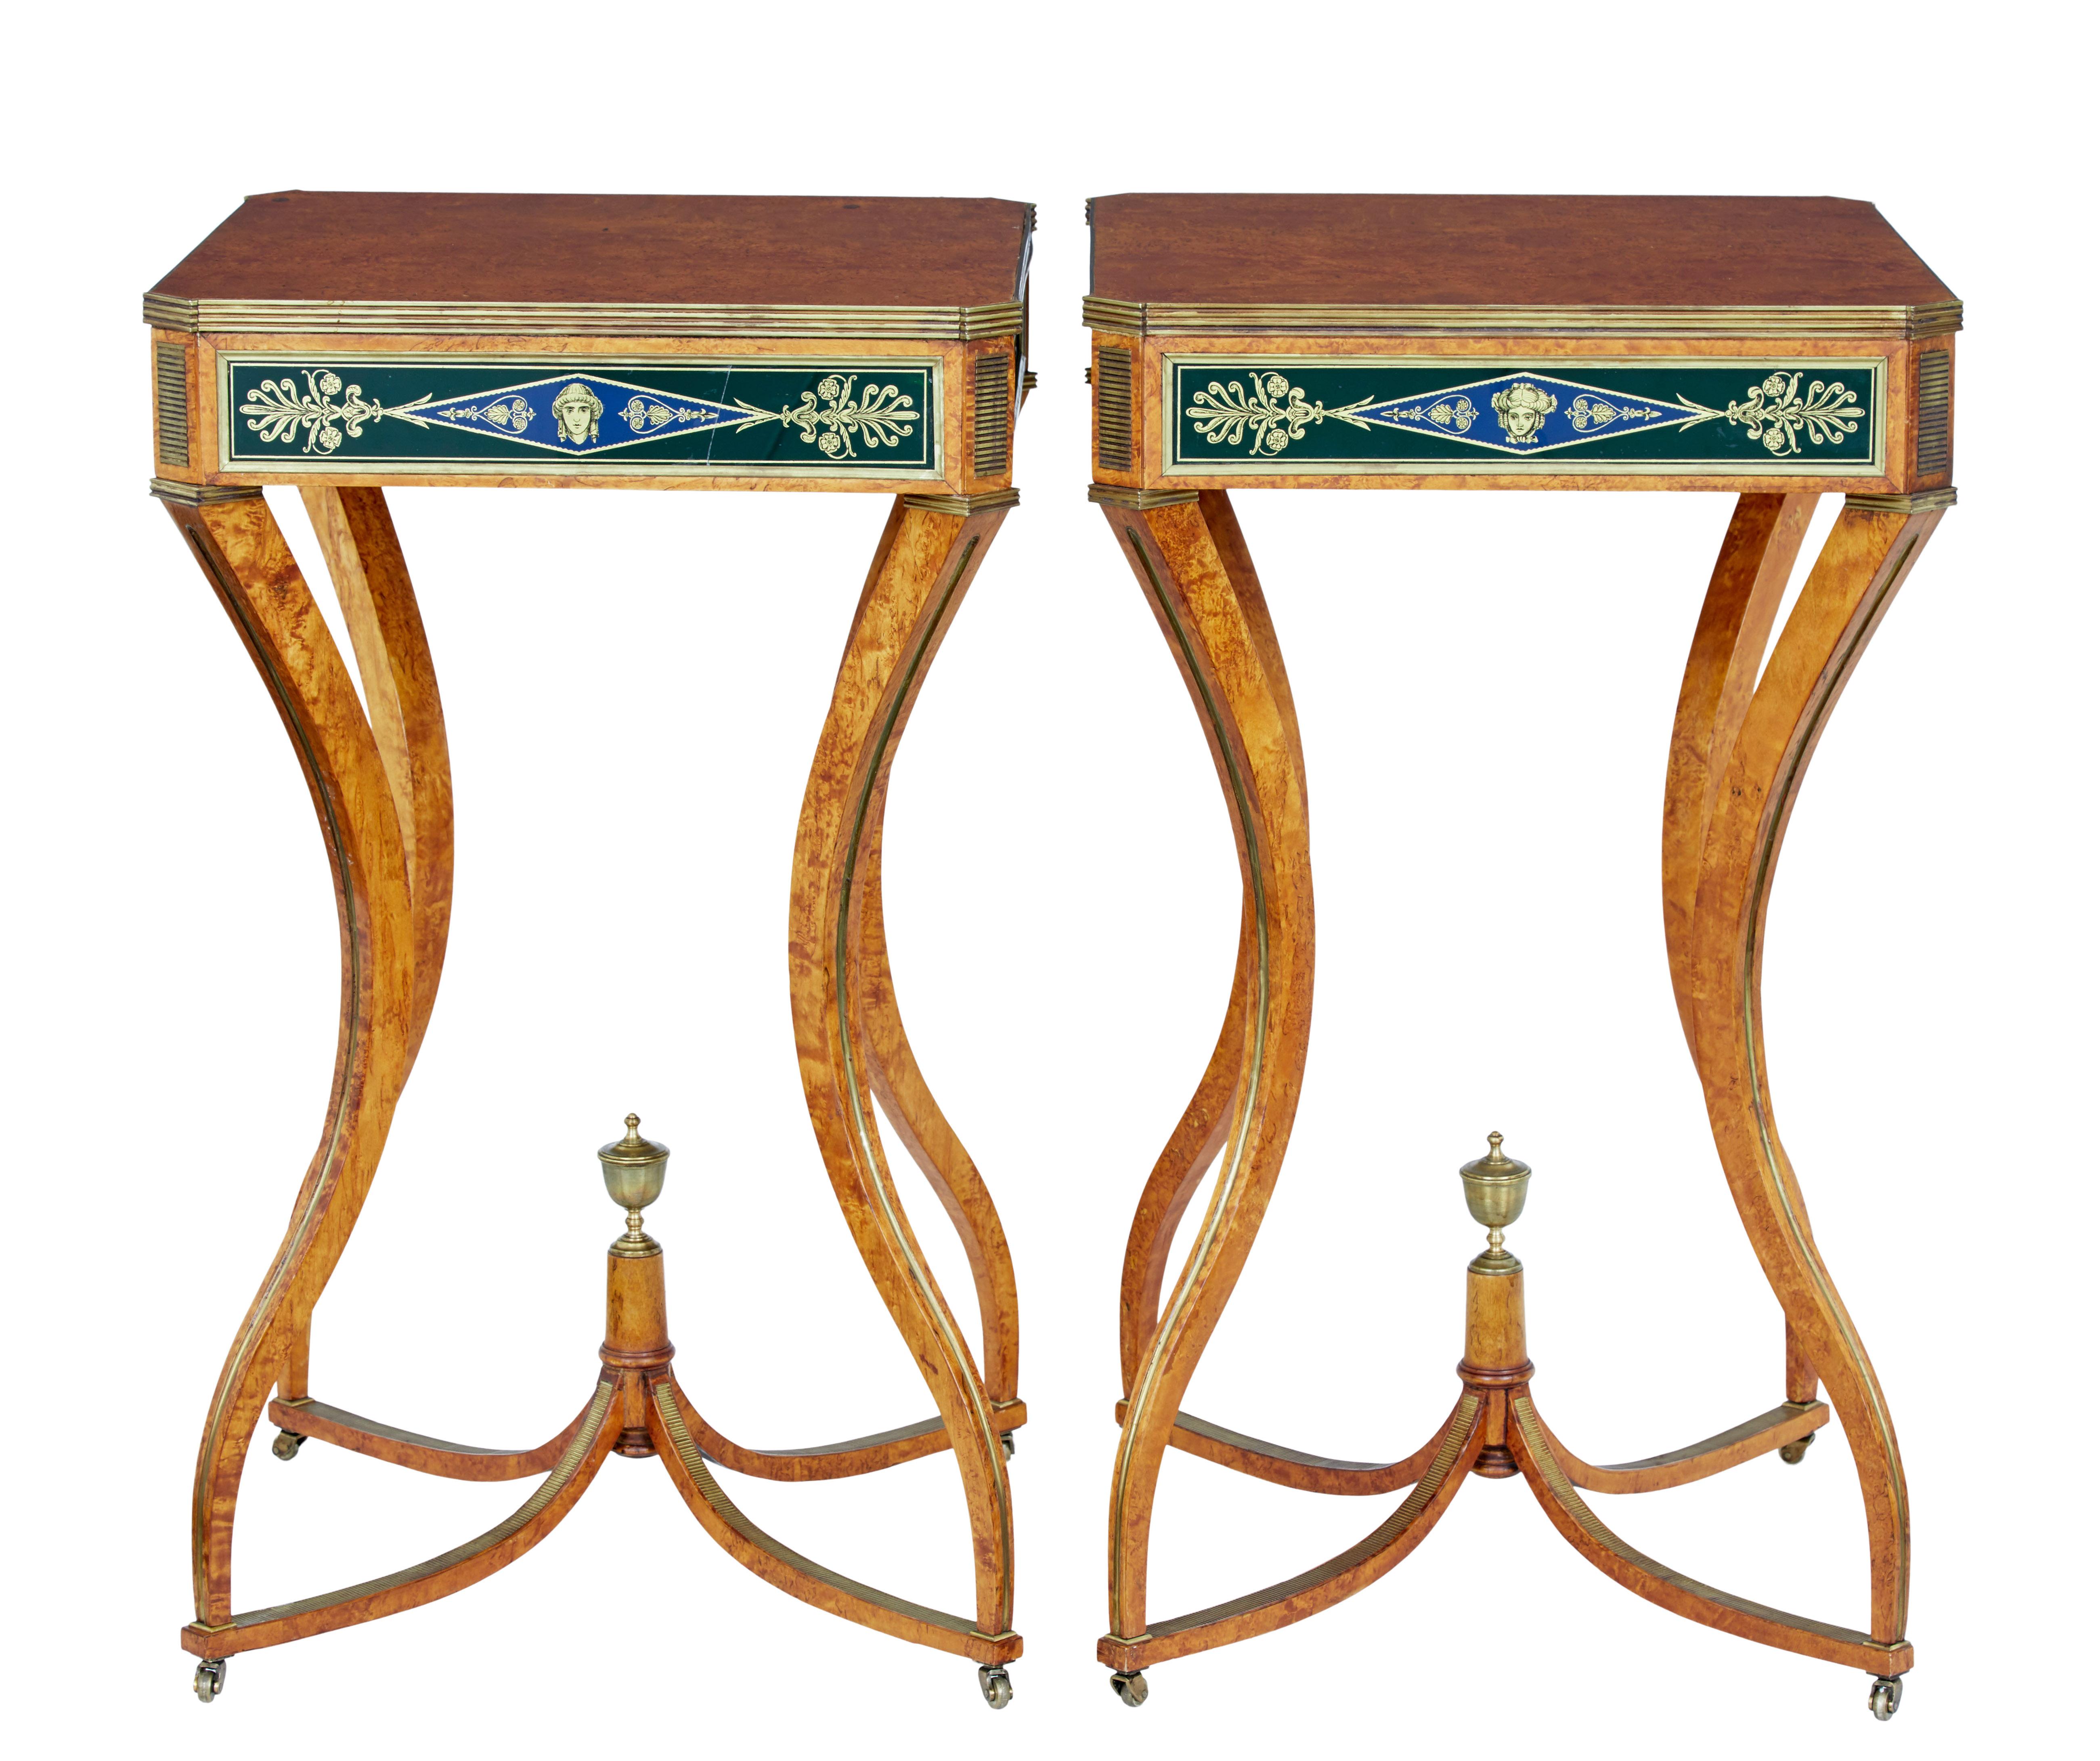 Hand-Crafted Pair of 19th Century Burr Birch Russian Occasional Tables